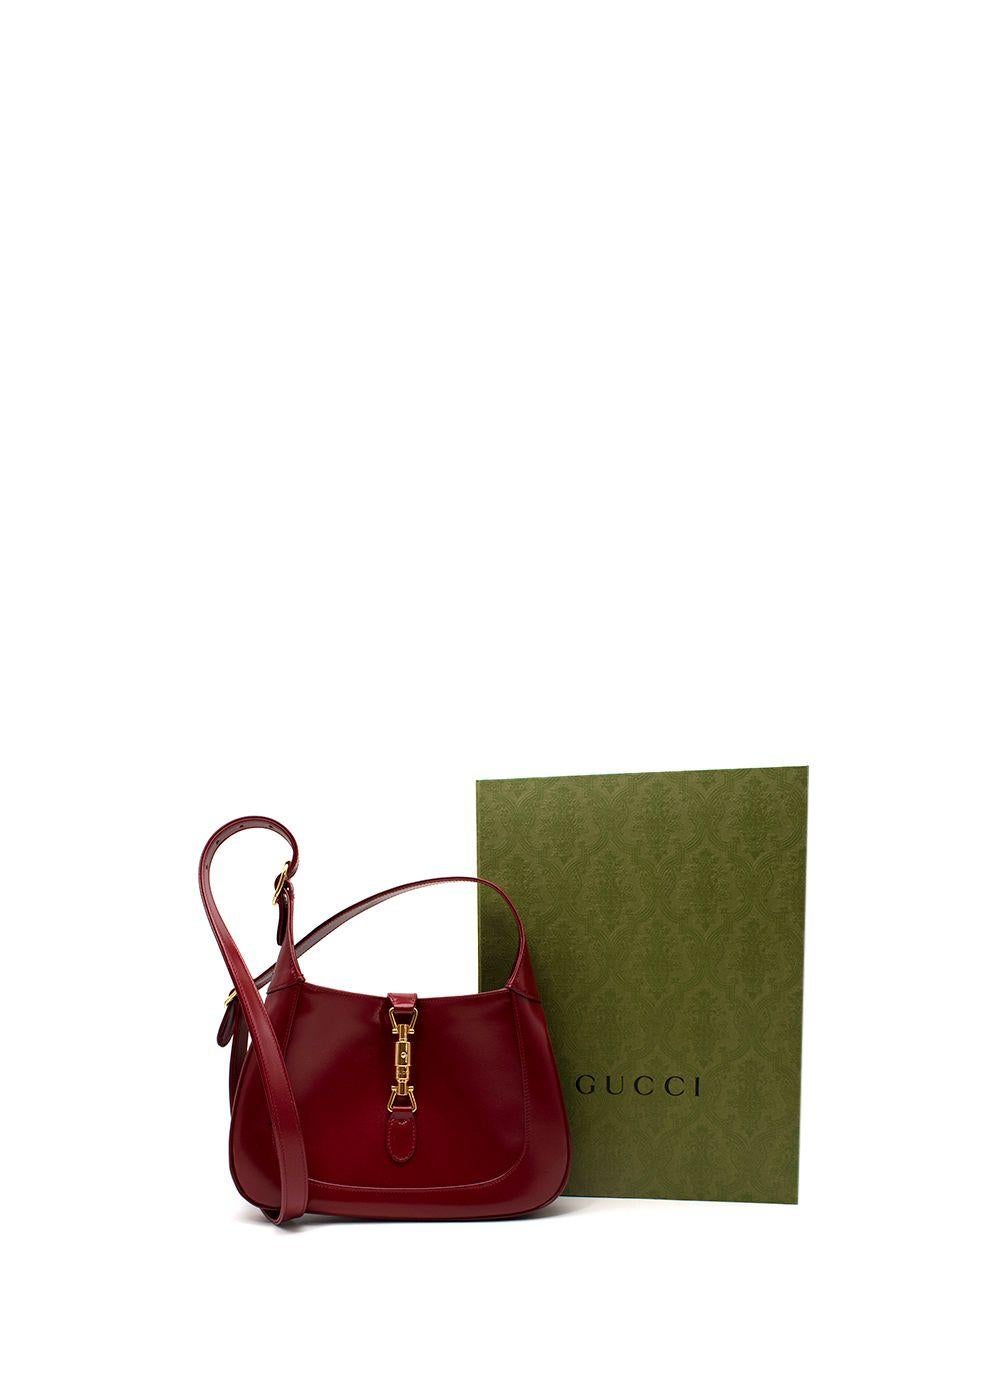 Gucci Burgundy Leather Jackie 1961 Bag

- Rerelease of the iconic Jackie bag
- Rich burgundy leather, adorned with a gold-tone metal piston closure, reminiscent of the house horsebit
- Flat leather shoulder strap, with adjustable buckle and add-on